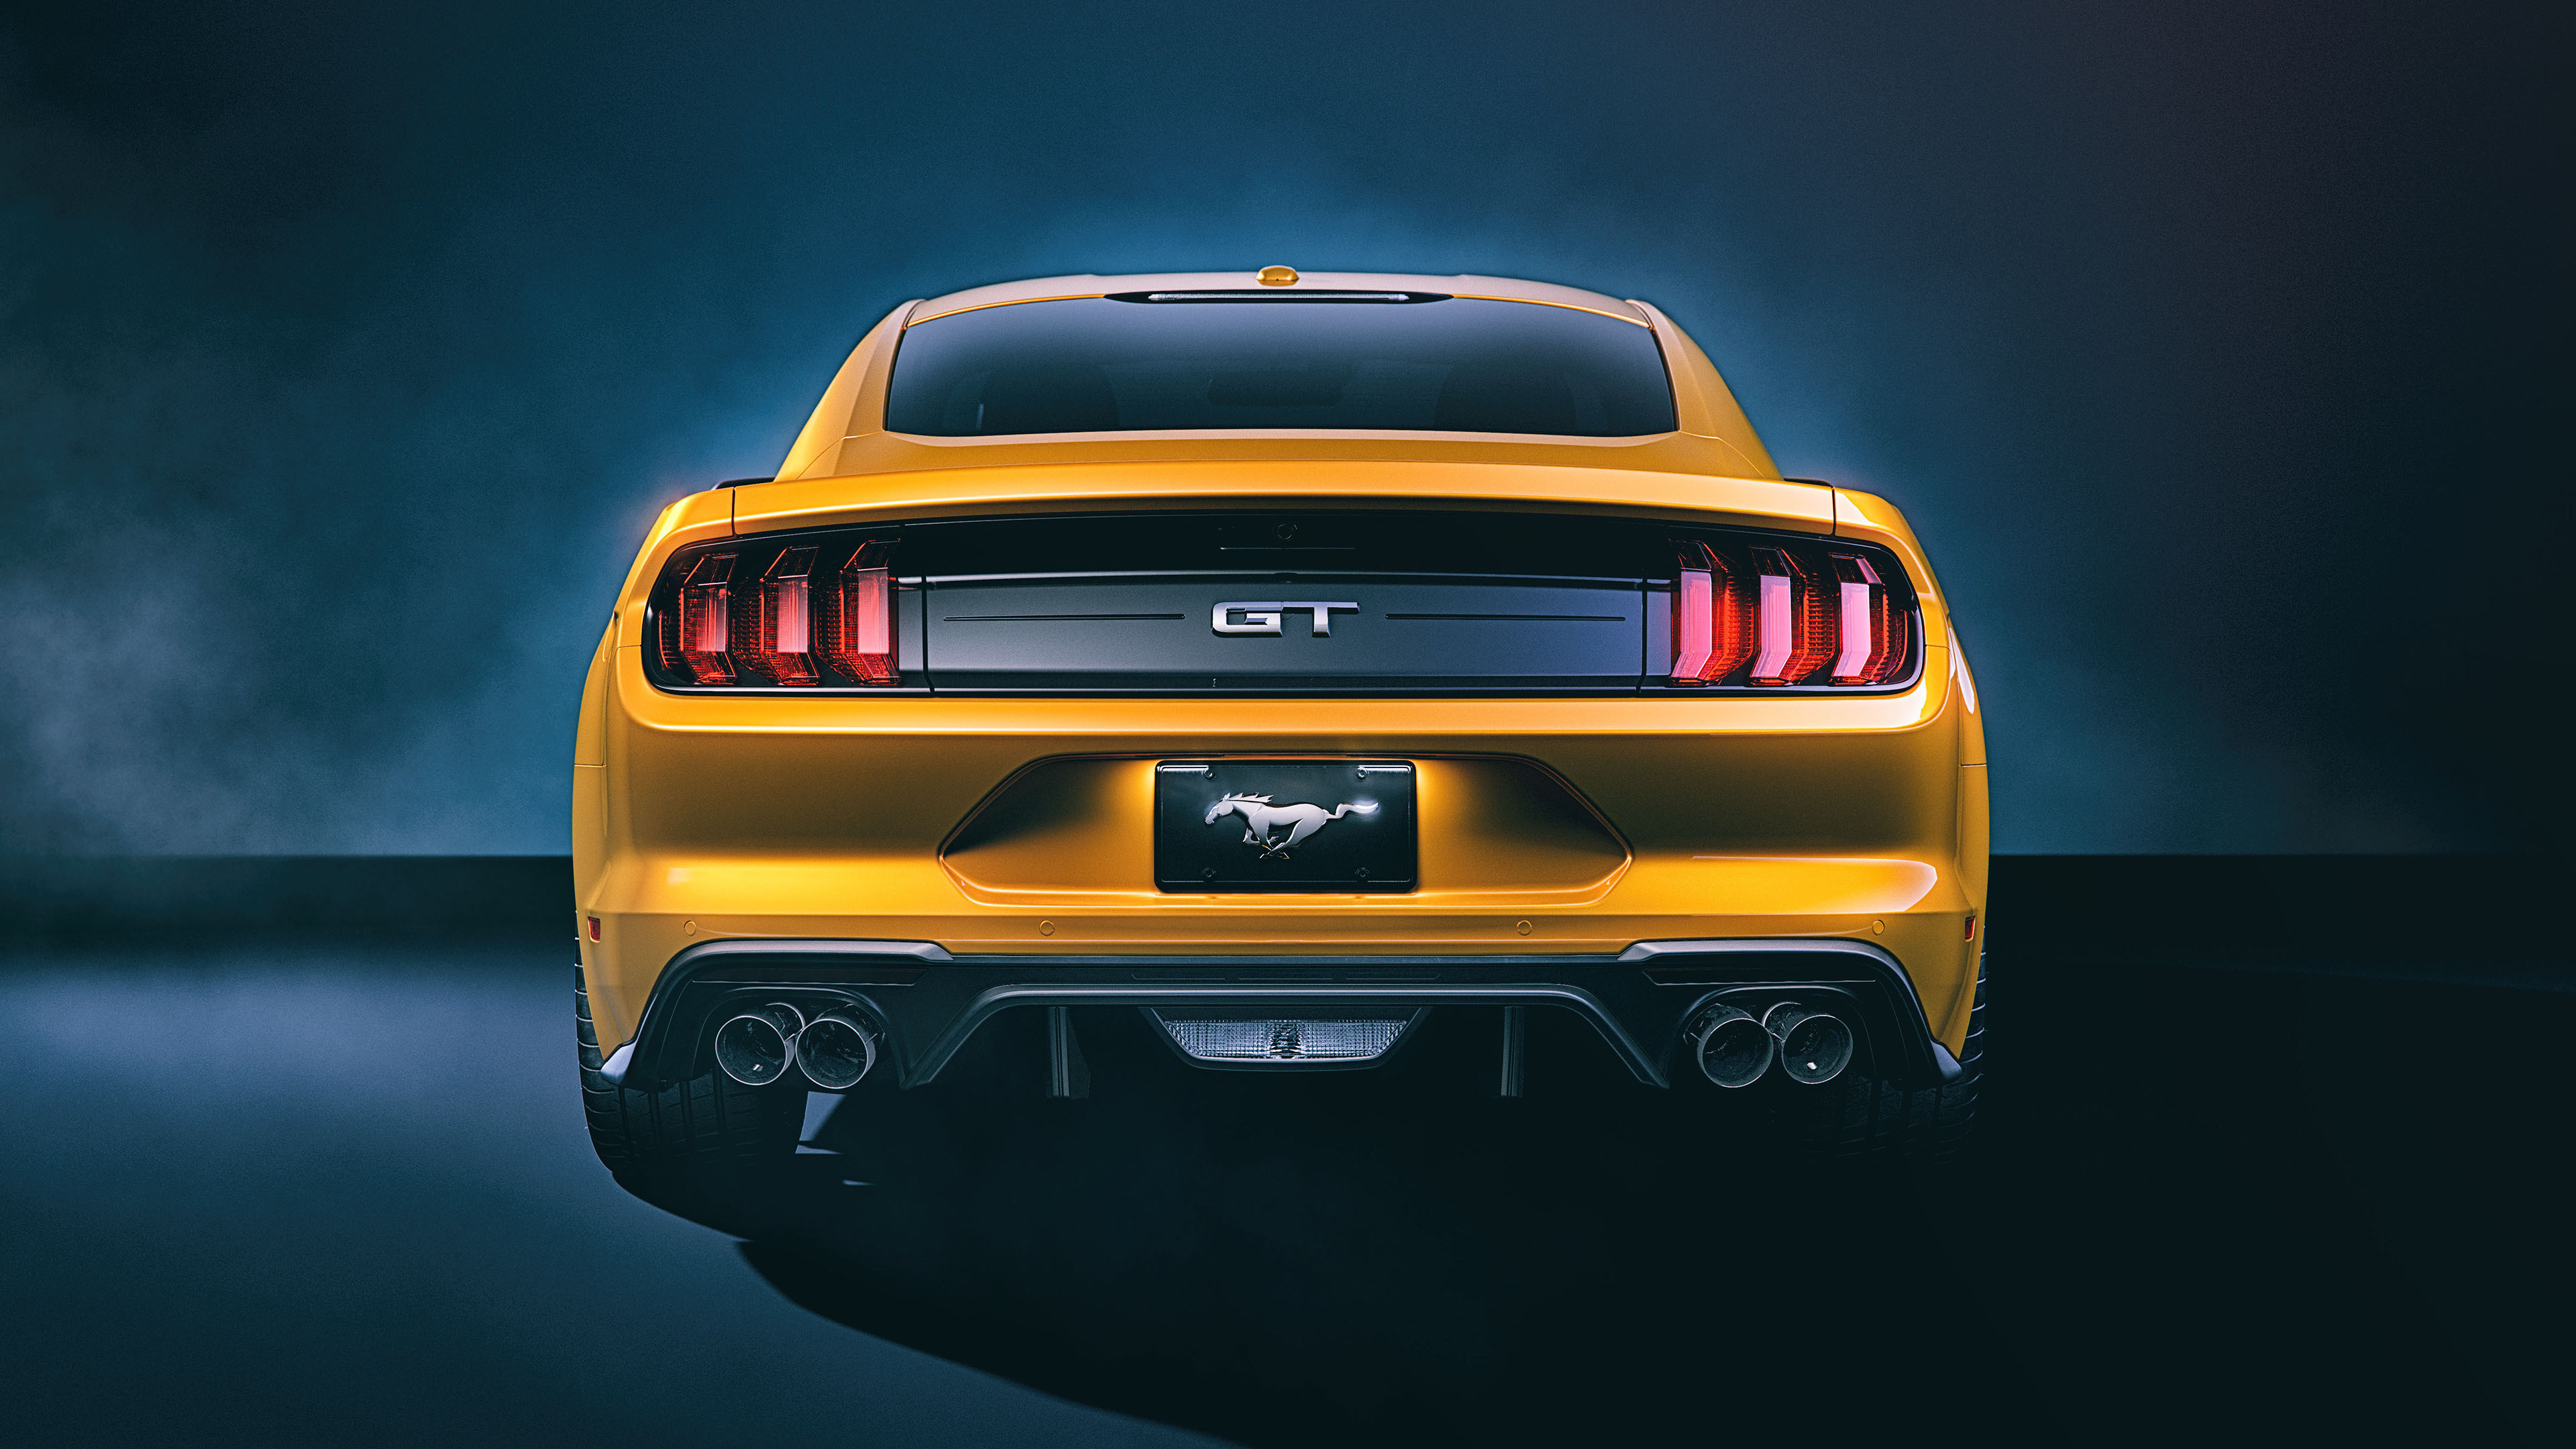 Ford Mustang GT, Dynamic design, Performance vehicles, Automotive engineering, Luxury sports cars, 3840x2160 4K Desktop